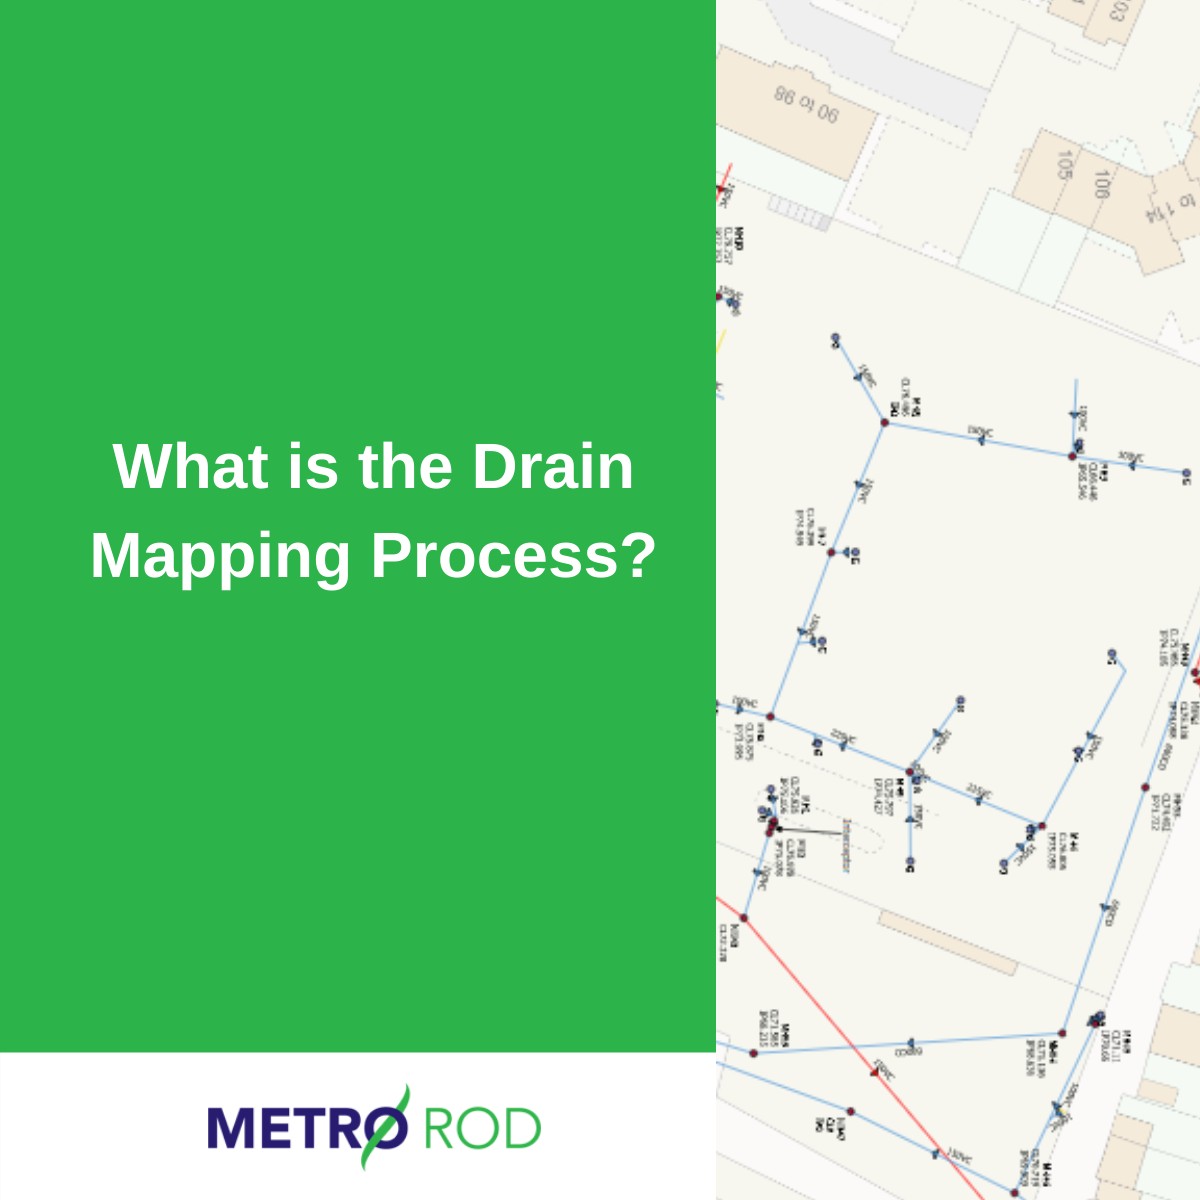 What is the Drain Mapping Process?